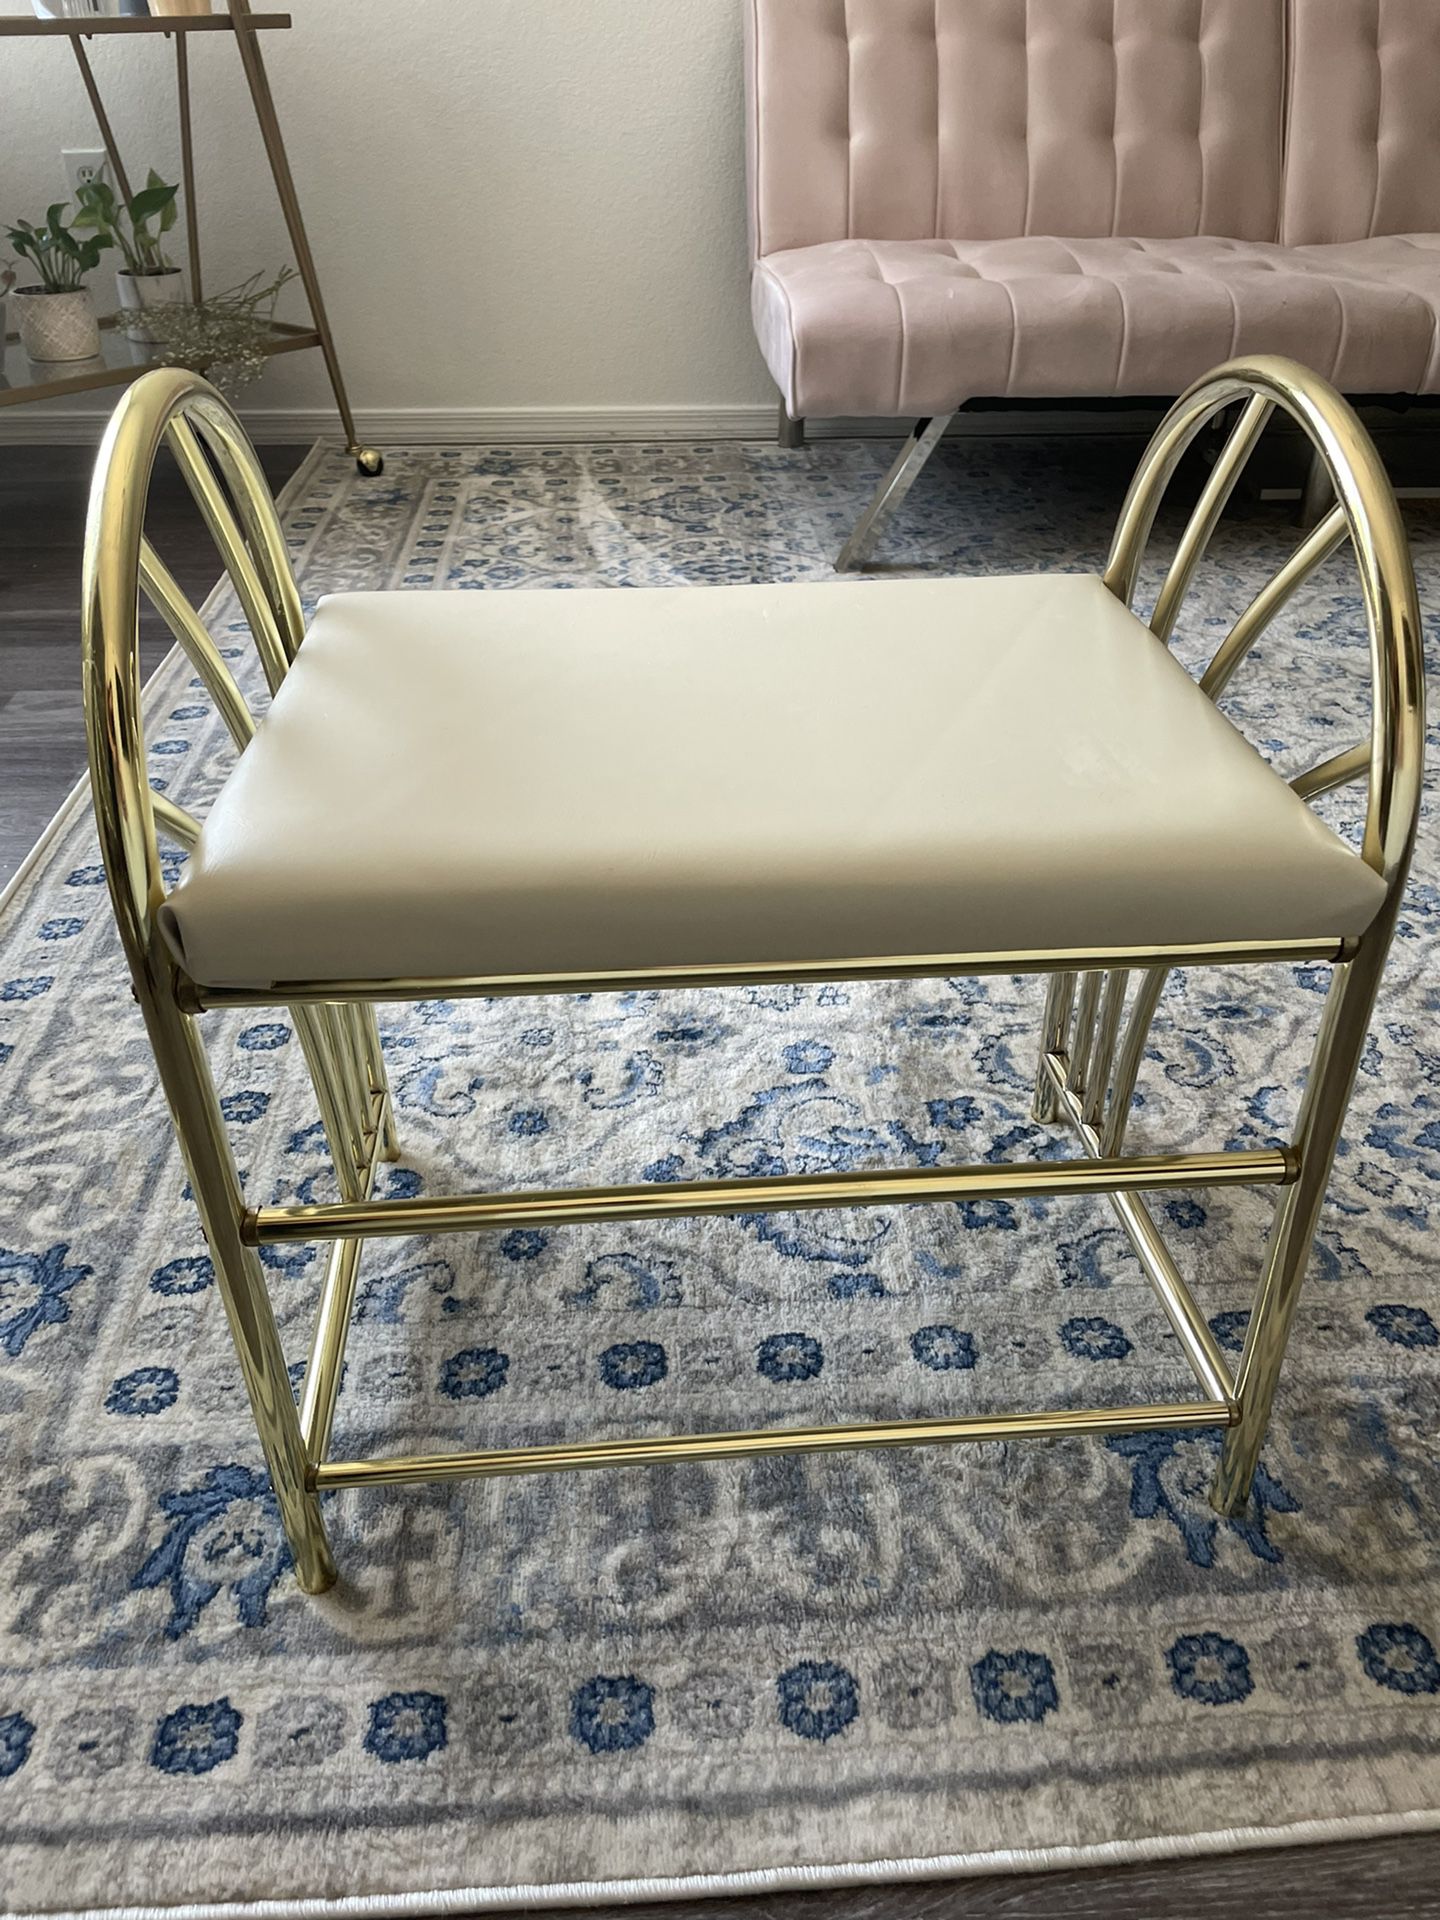 Vintage Gold Vanity Chair/bench From The 70’s